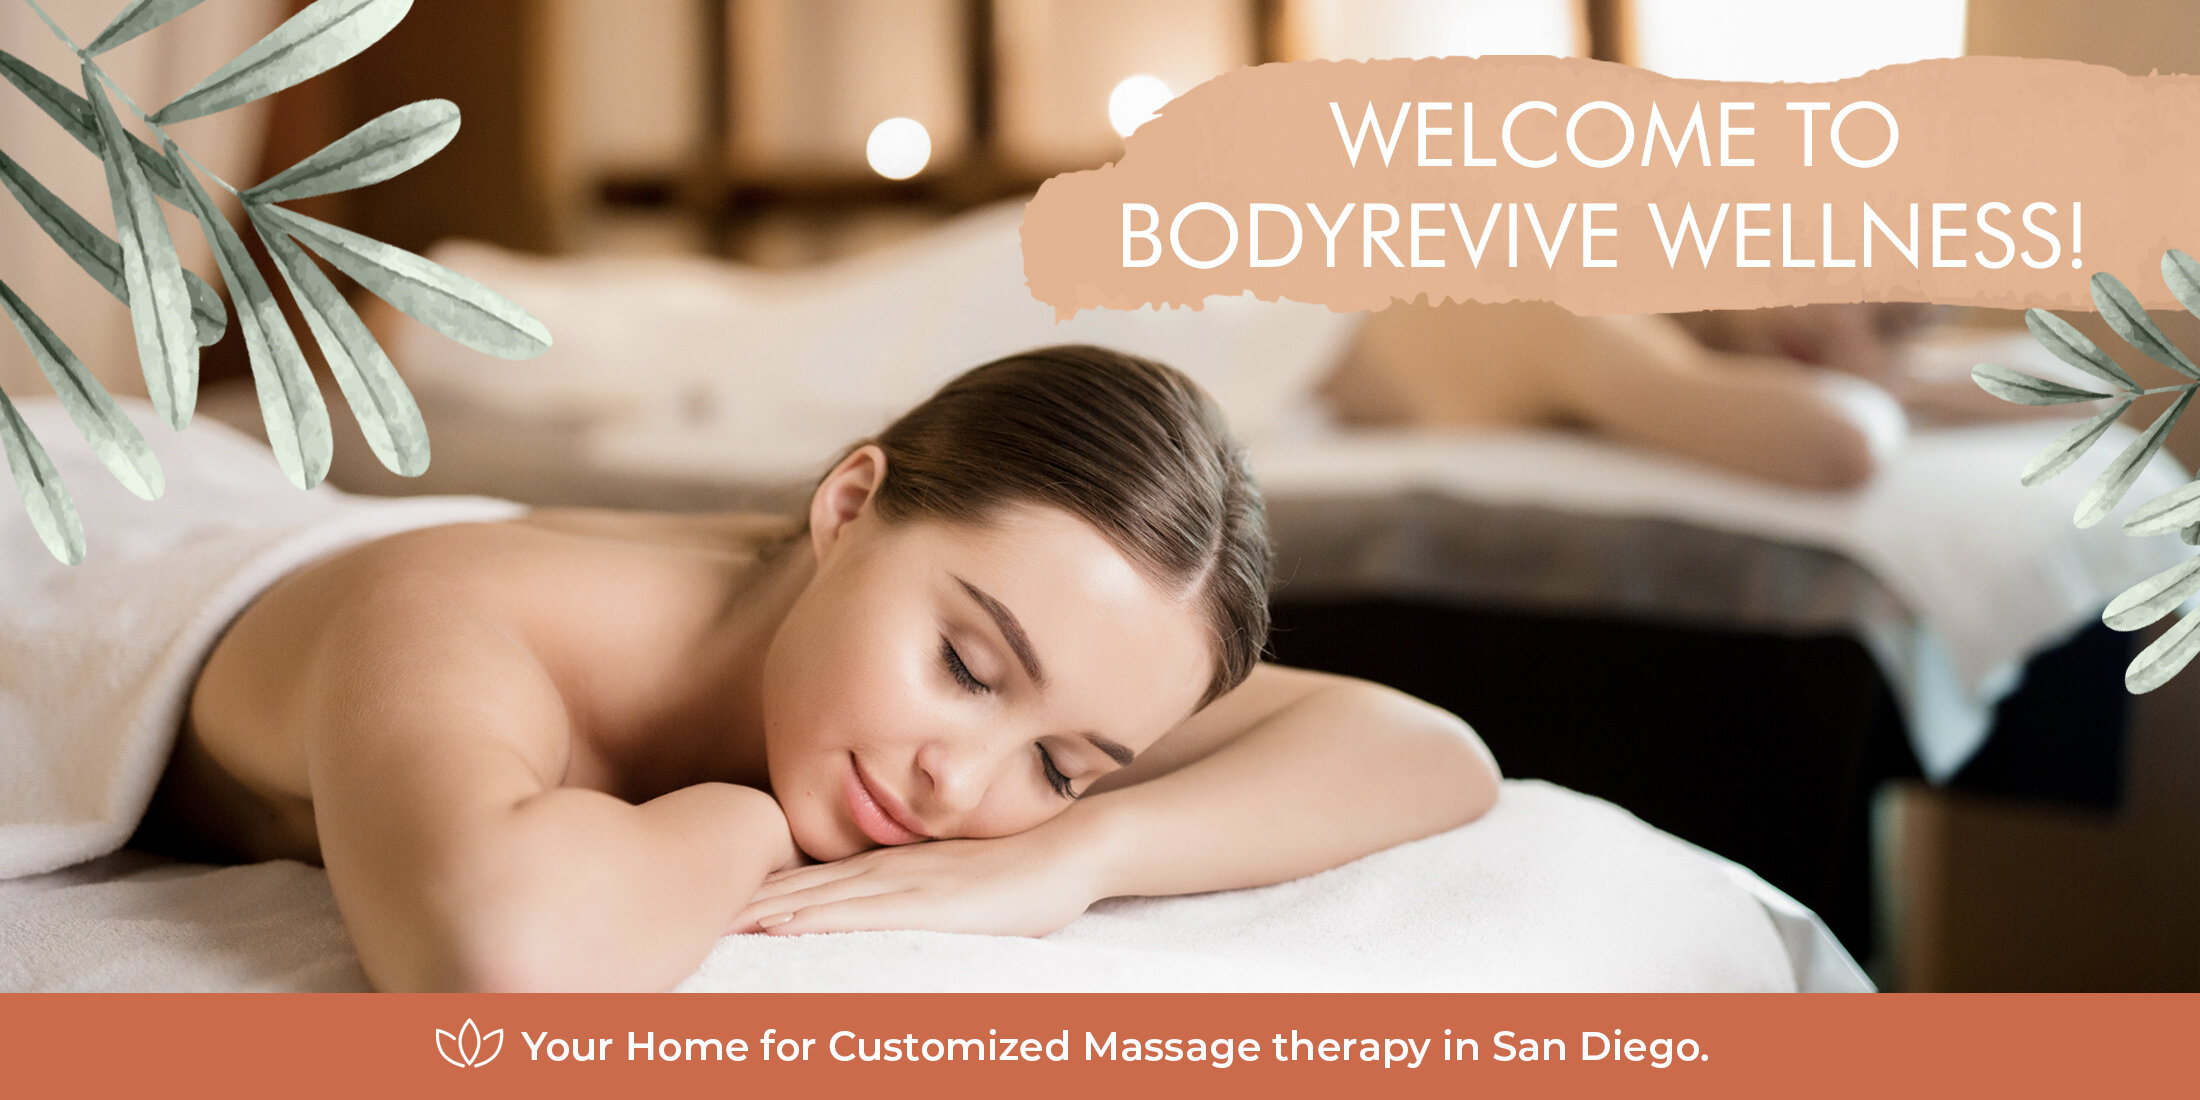 WELCOME TO BODYREVIVE WELLNESS! 